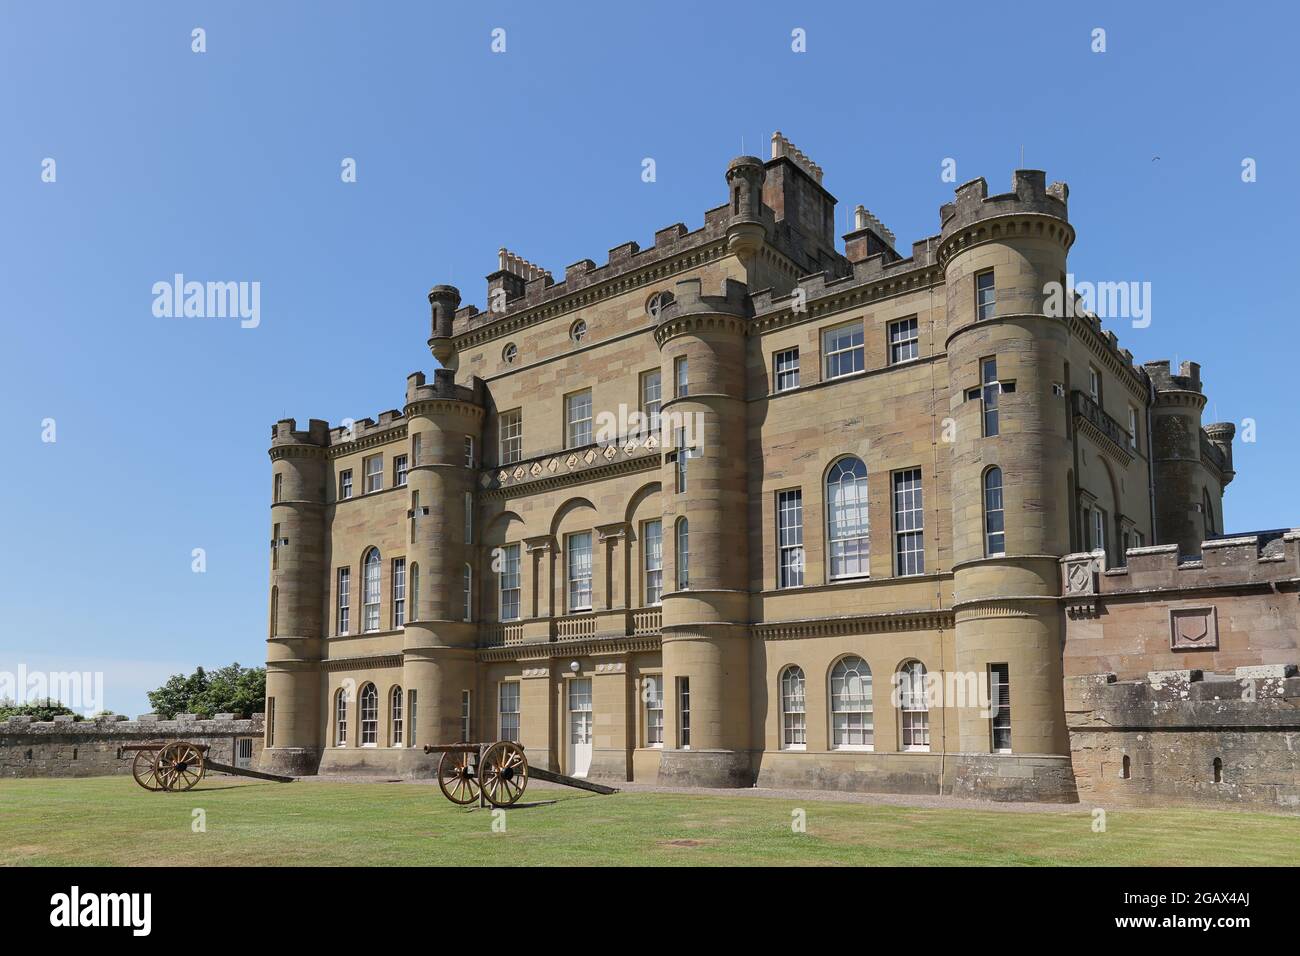 Culzean Castle and Gardens owned by the National Trust for Scotland, near Ayr, South Ayrshire, Scotland, UK Stock Photo